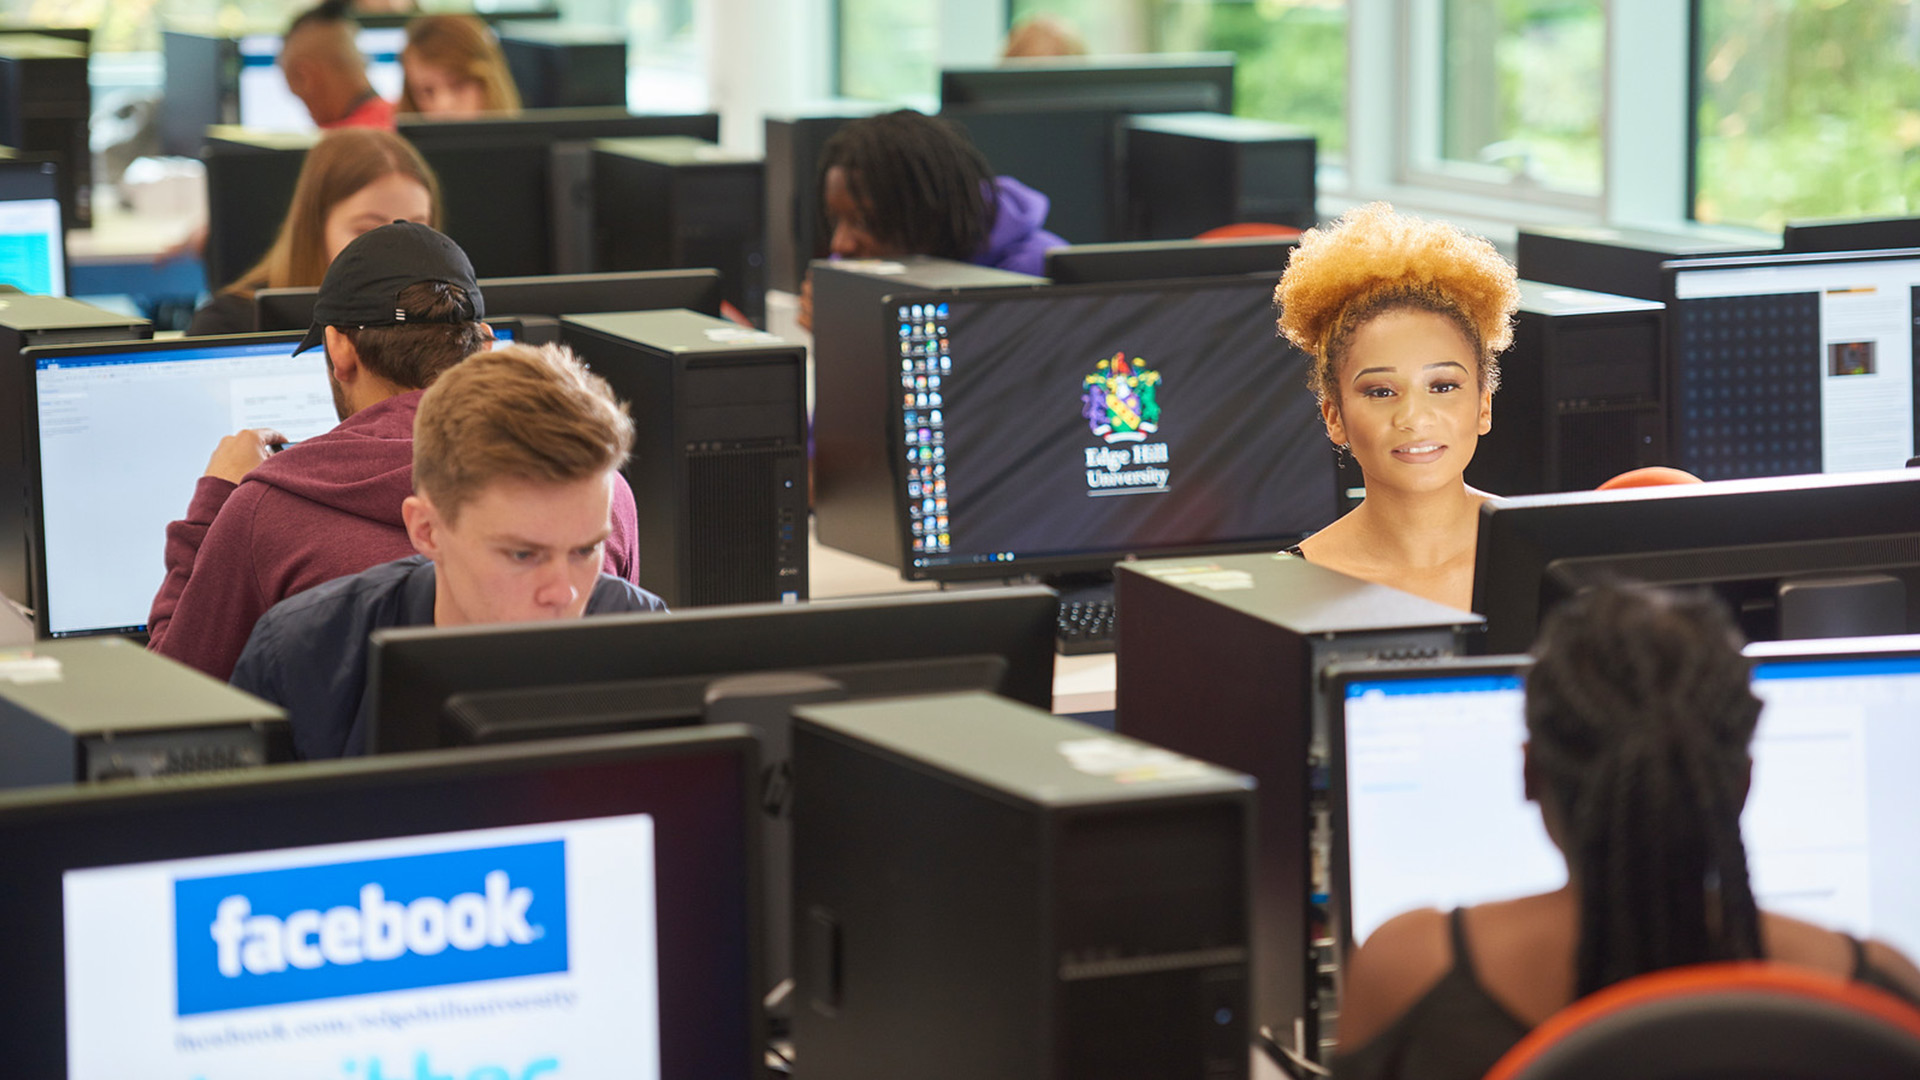 Group of students sat in front of computers studying